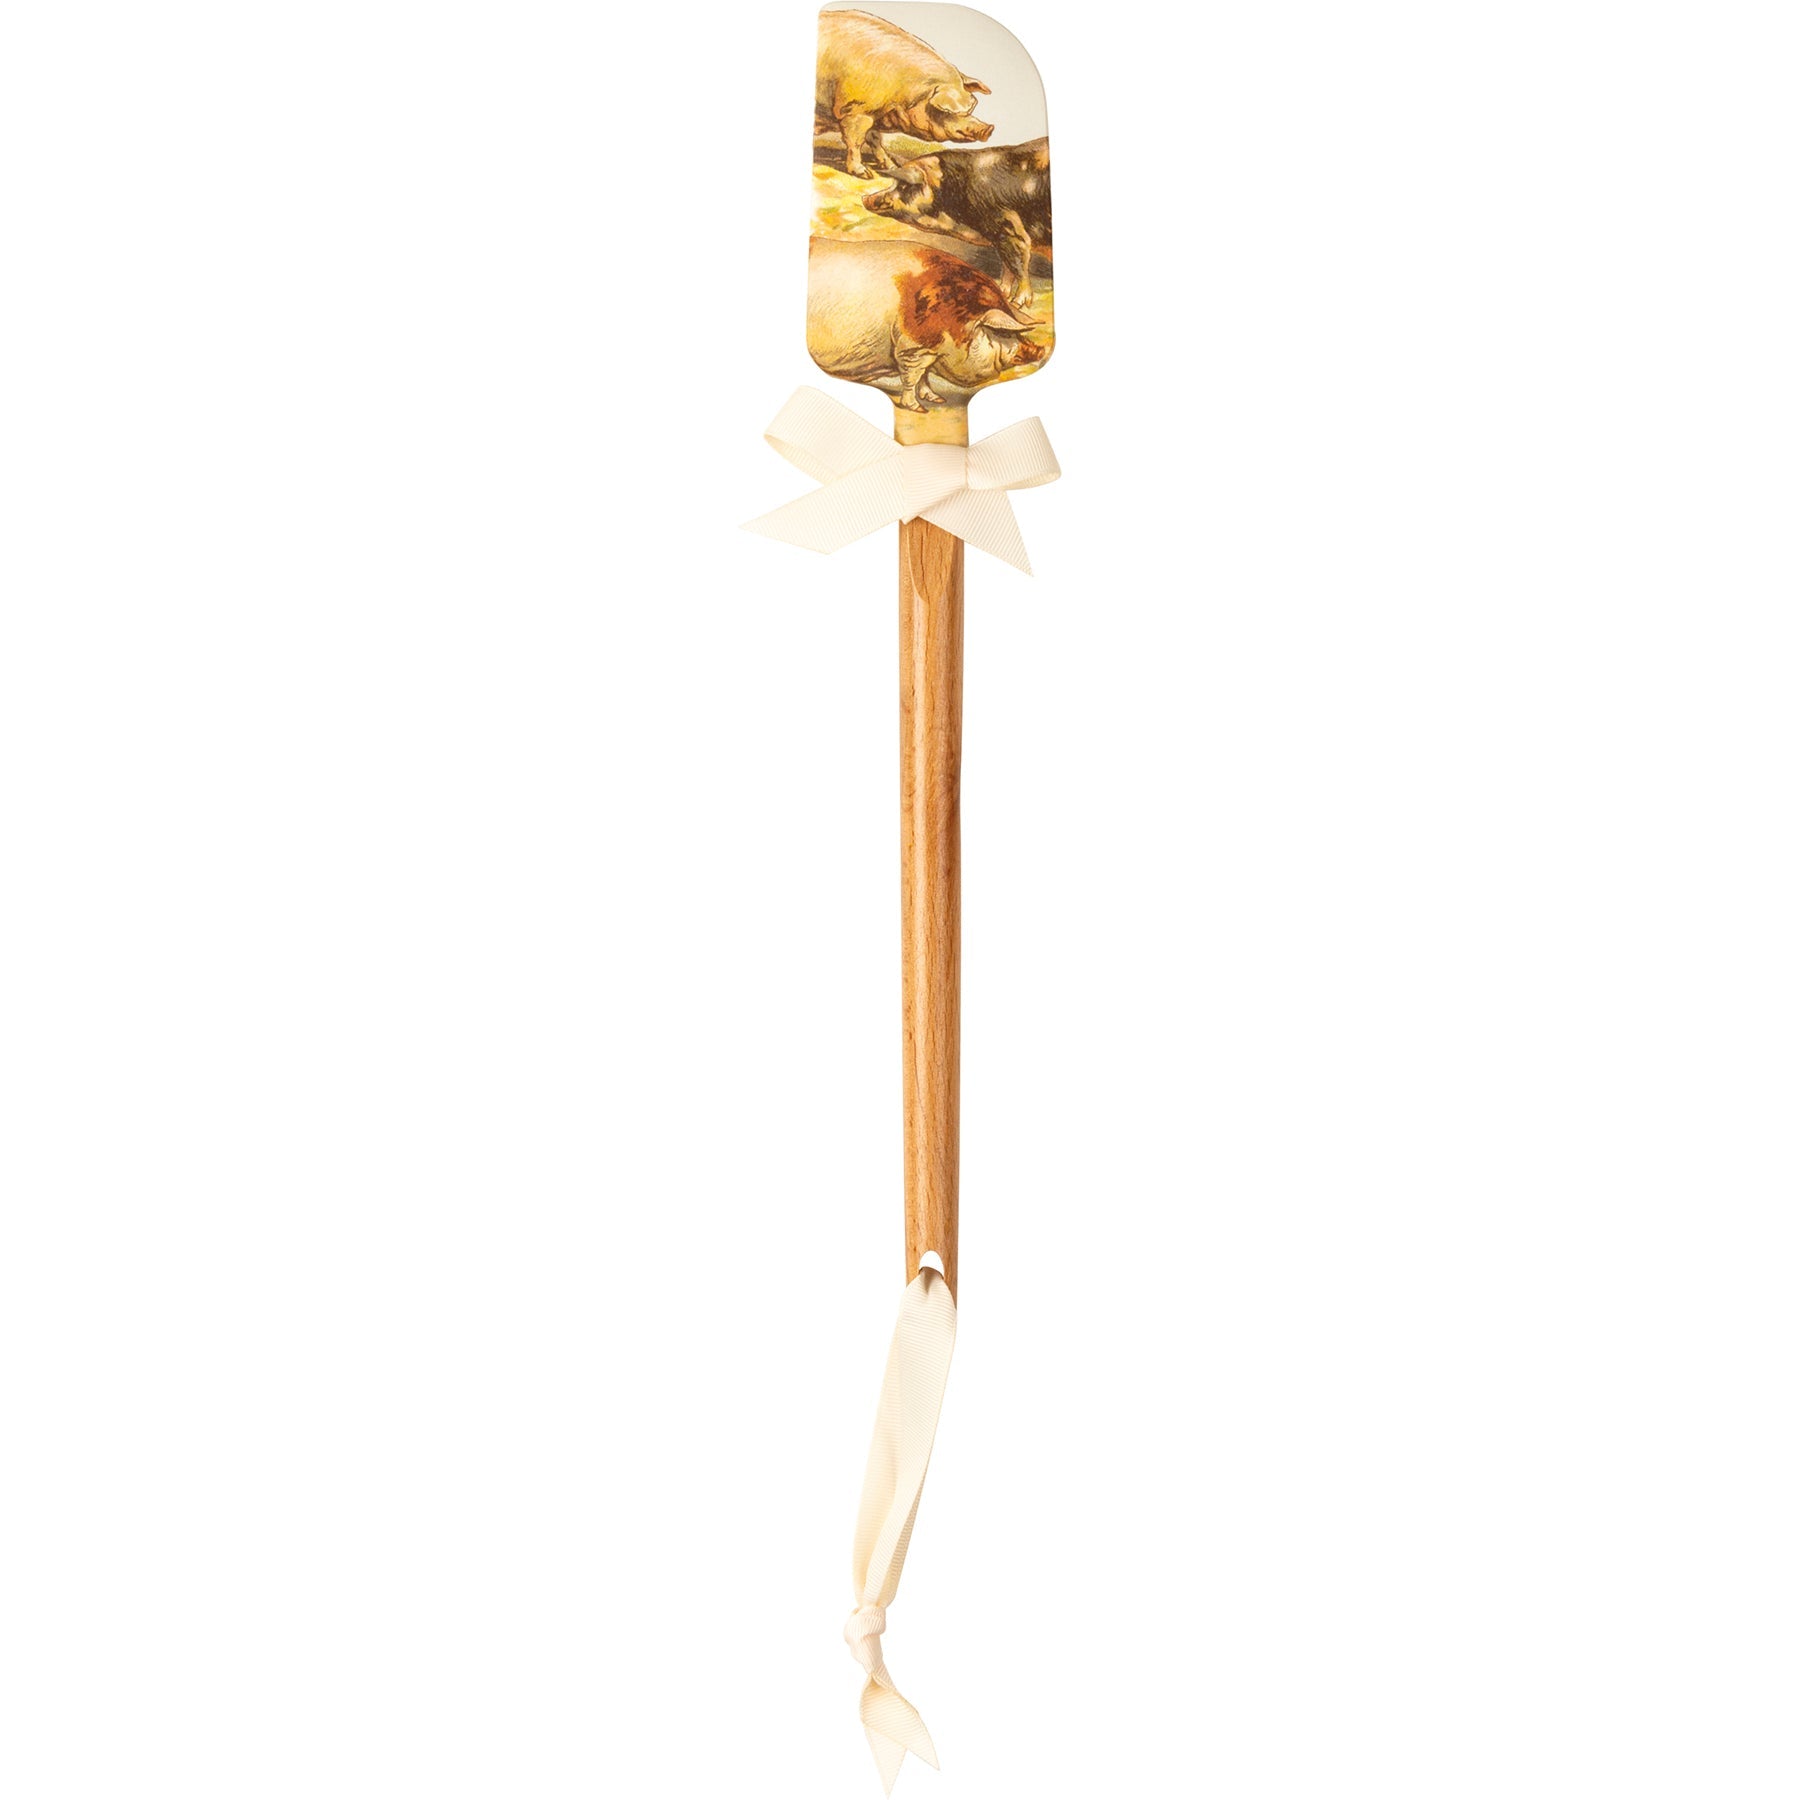 Sow's It Going Pig Spatula With A Wooden Handle